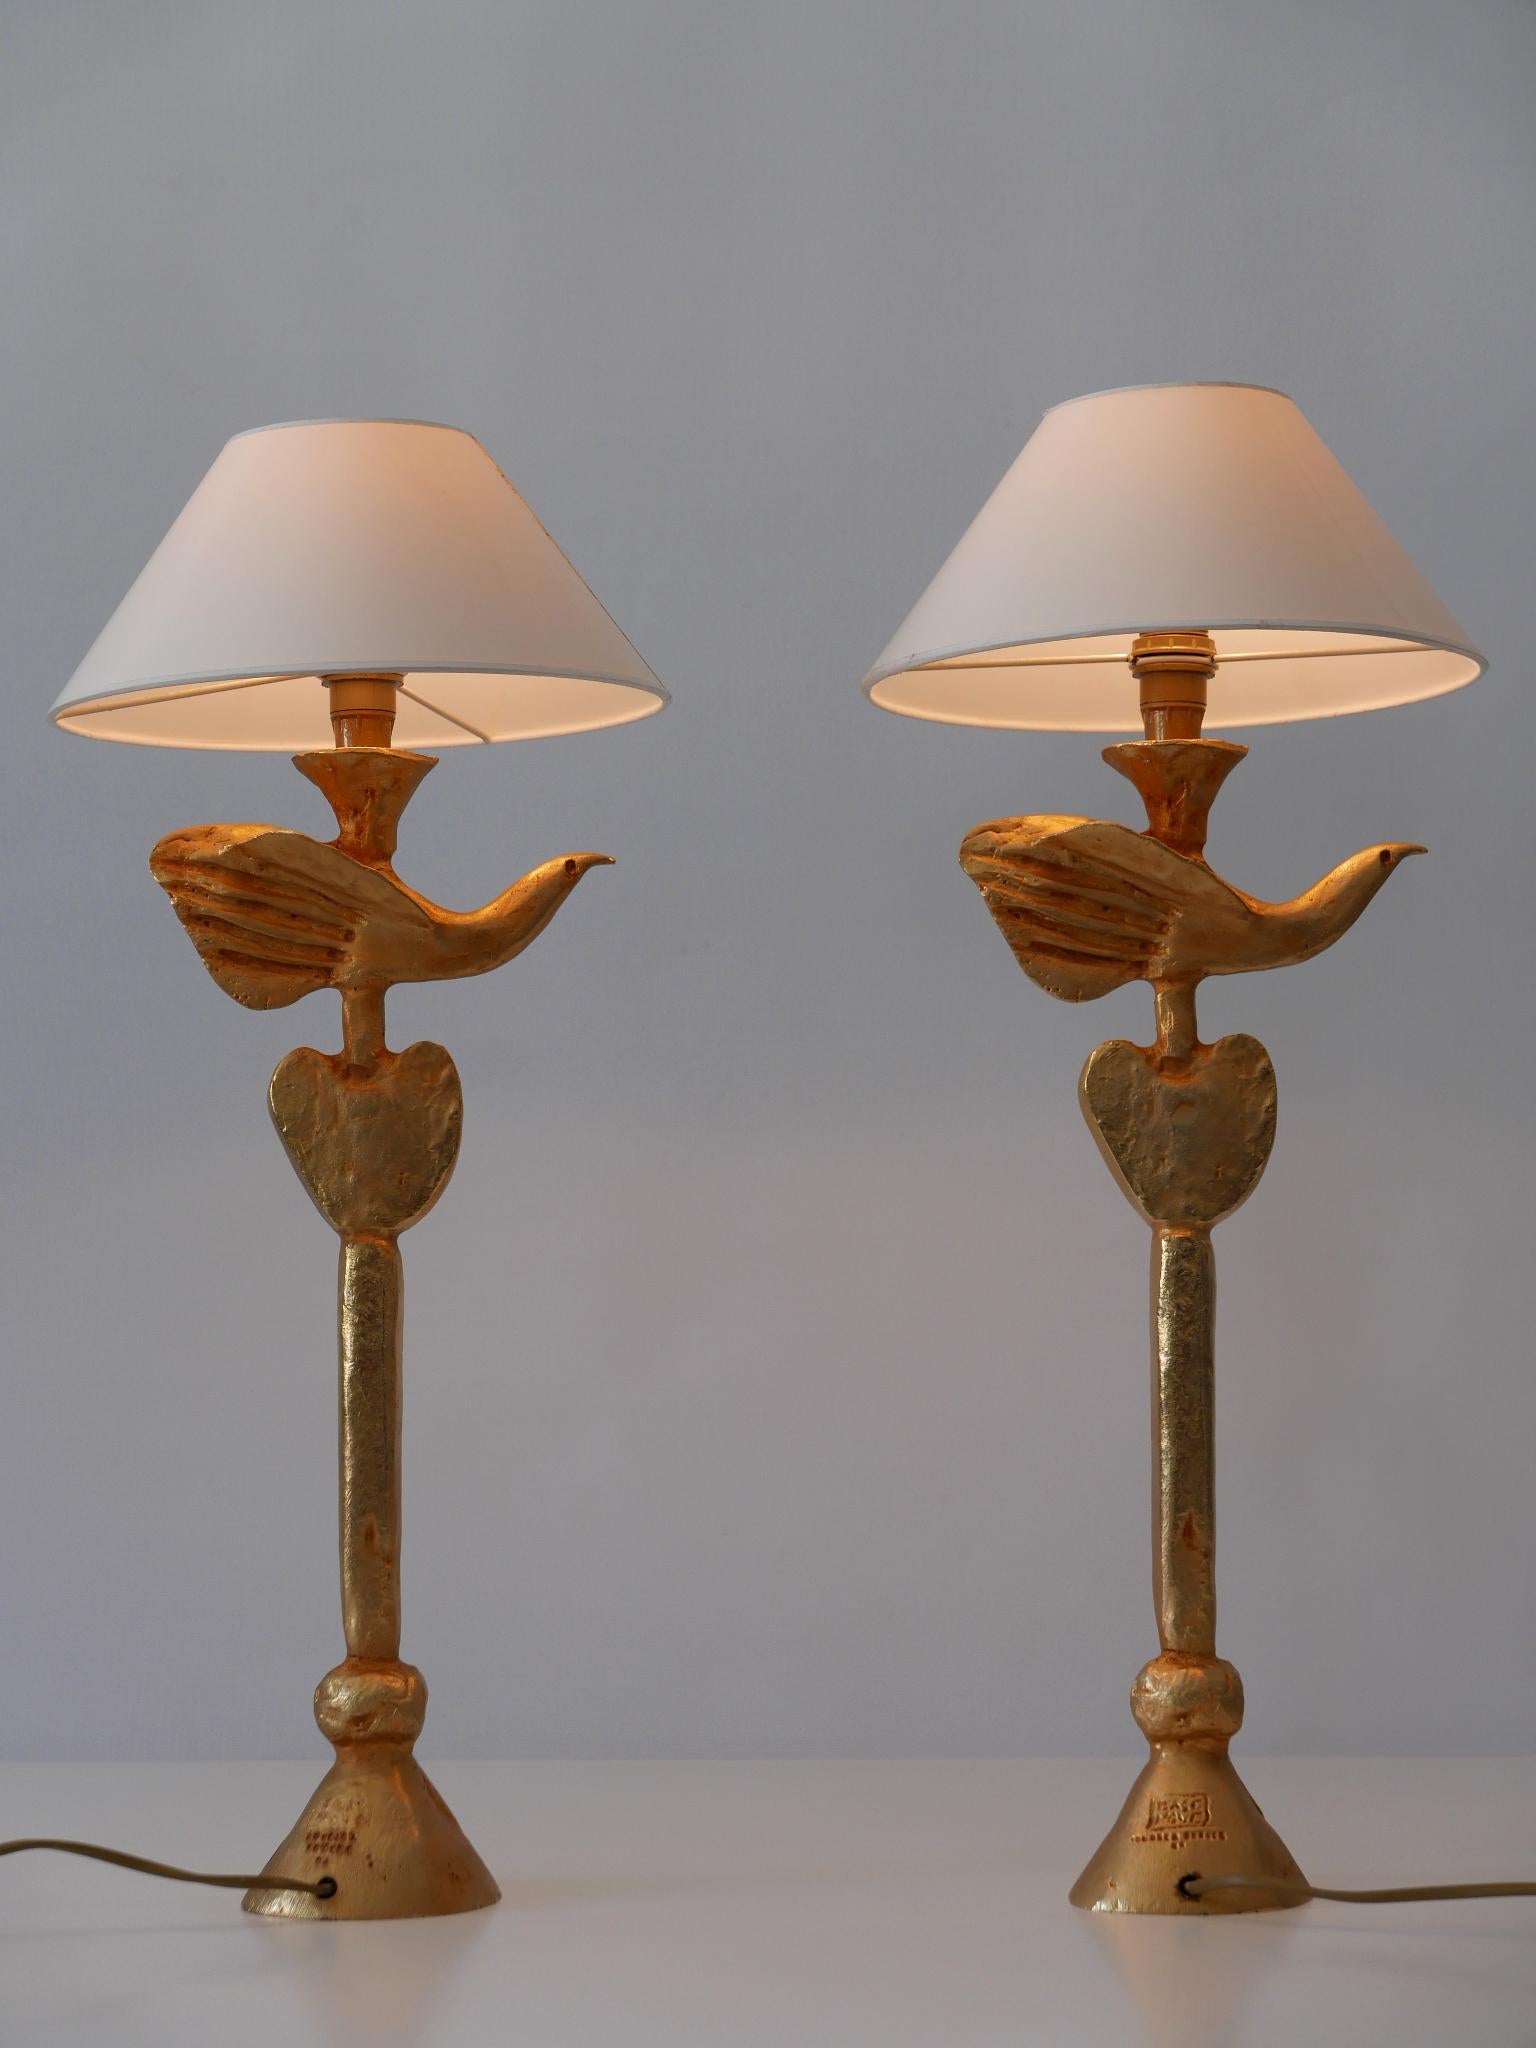 French Set of Two Gilt Bronze Dove Table Lamps by Pierre Casenove for Fondica France